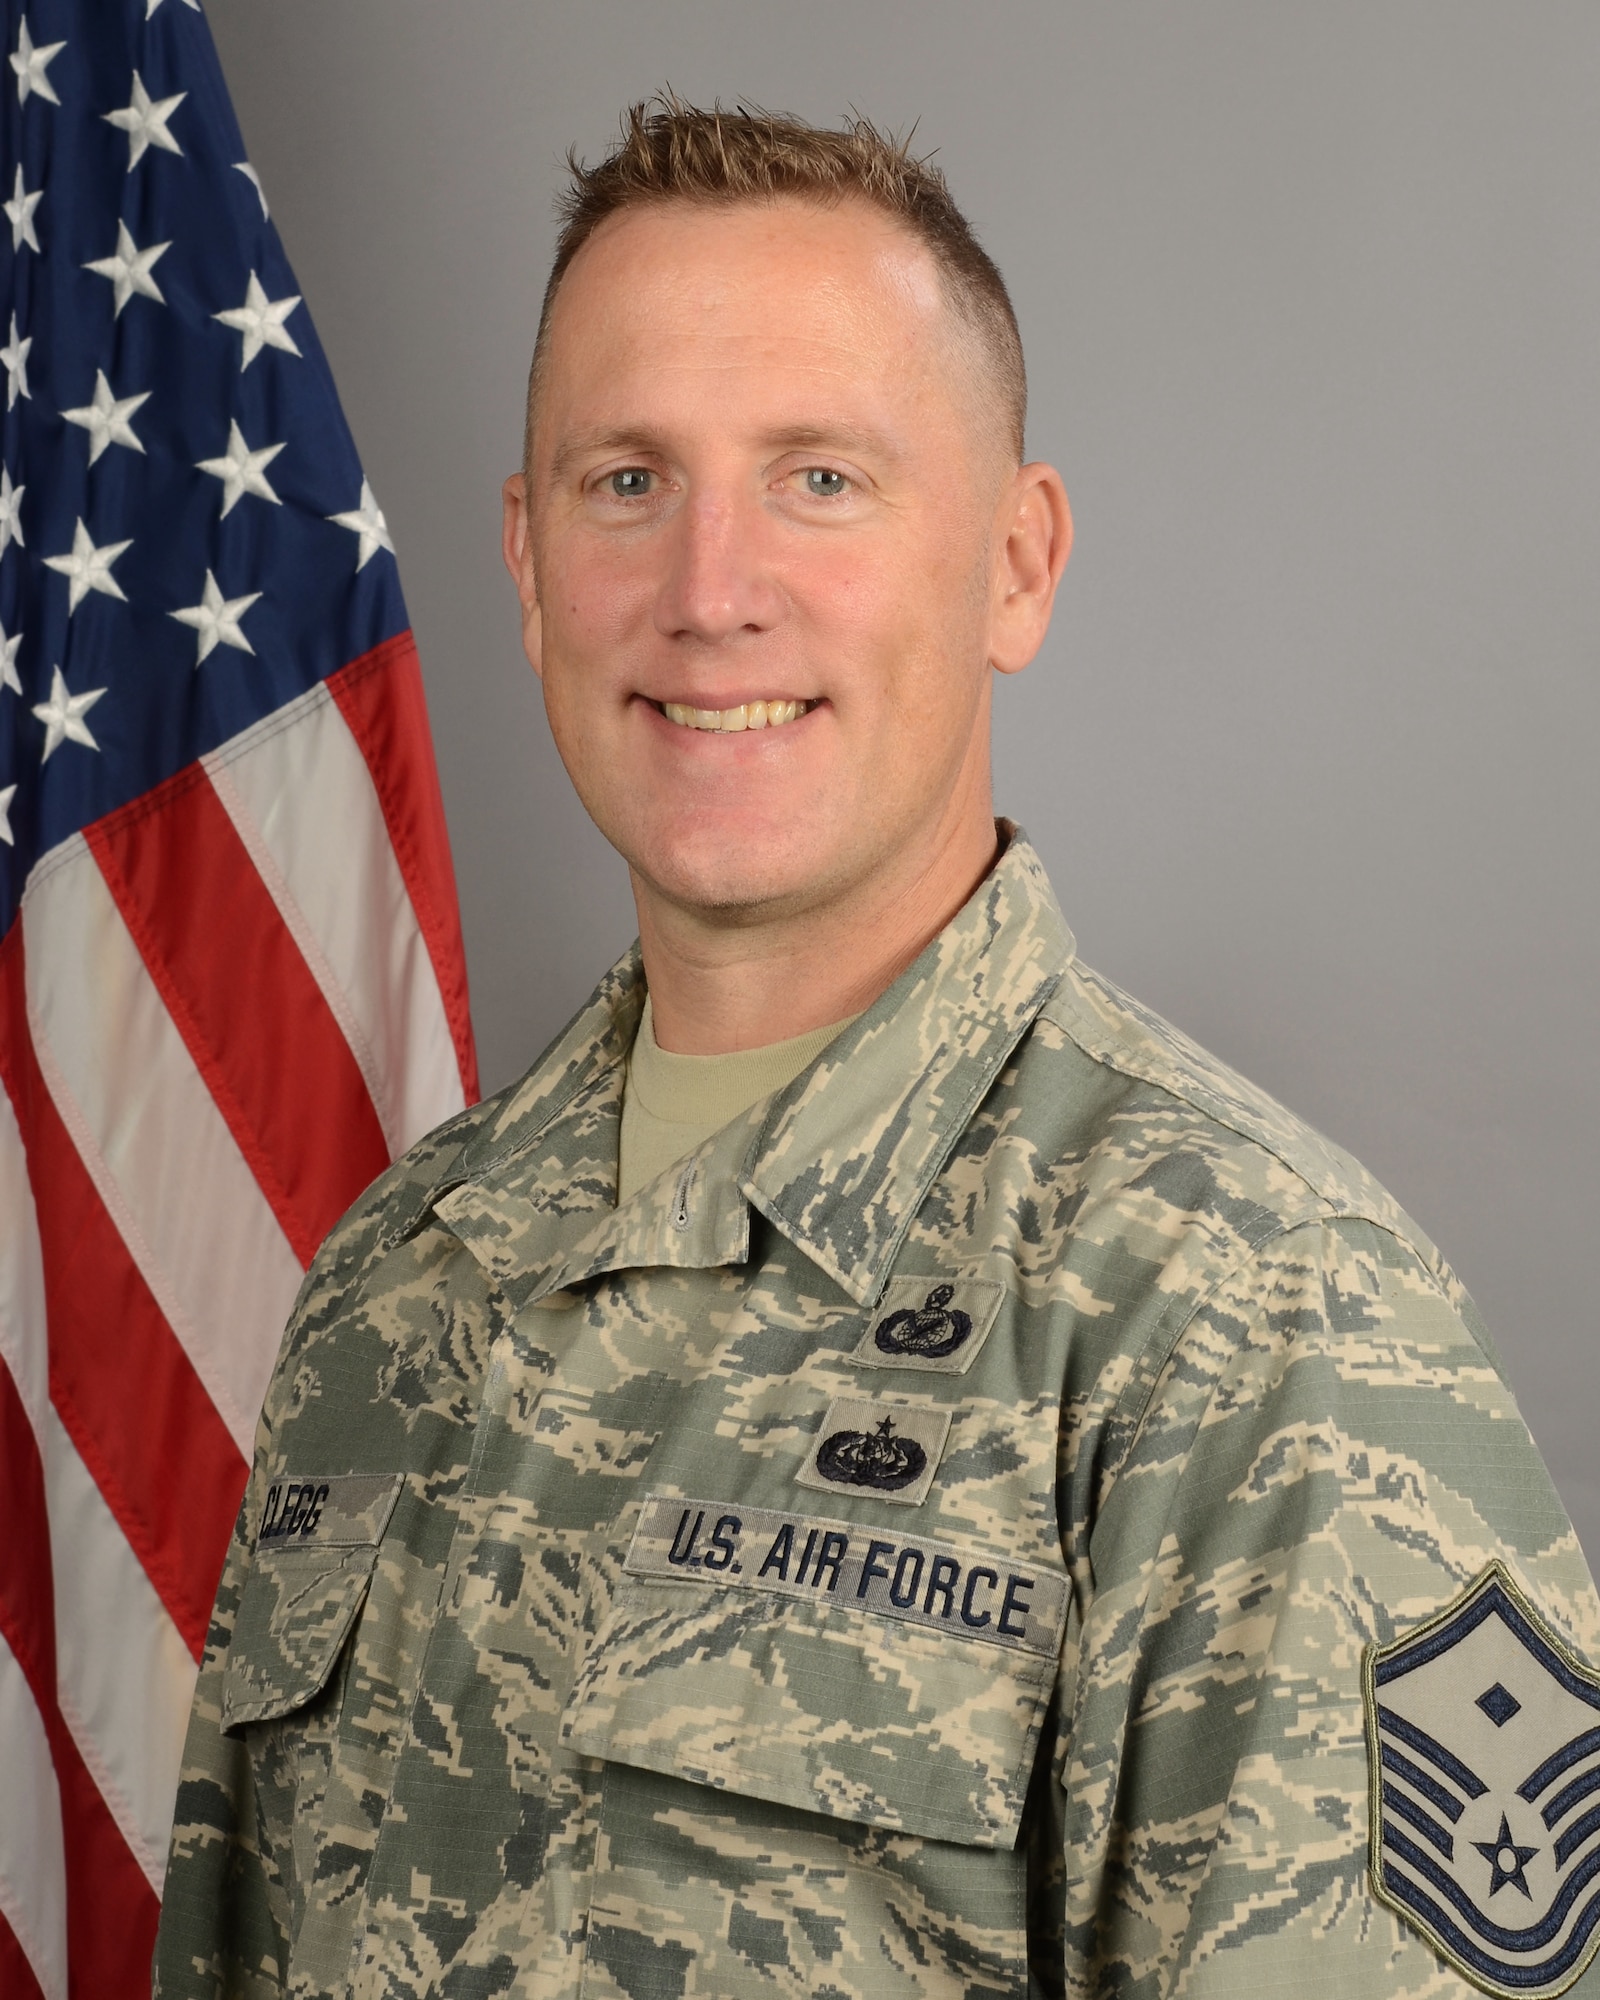 Portrait of U.S. Air Force Master Sgt. Carl Clegg, first sergeant for the 169th Mission Support Group at McEntire Joint National Guard Base, South Carolina, October 6, 2019.